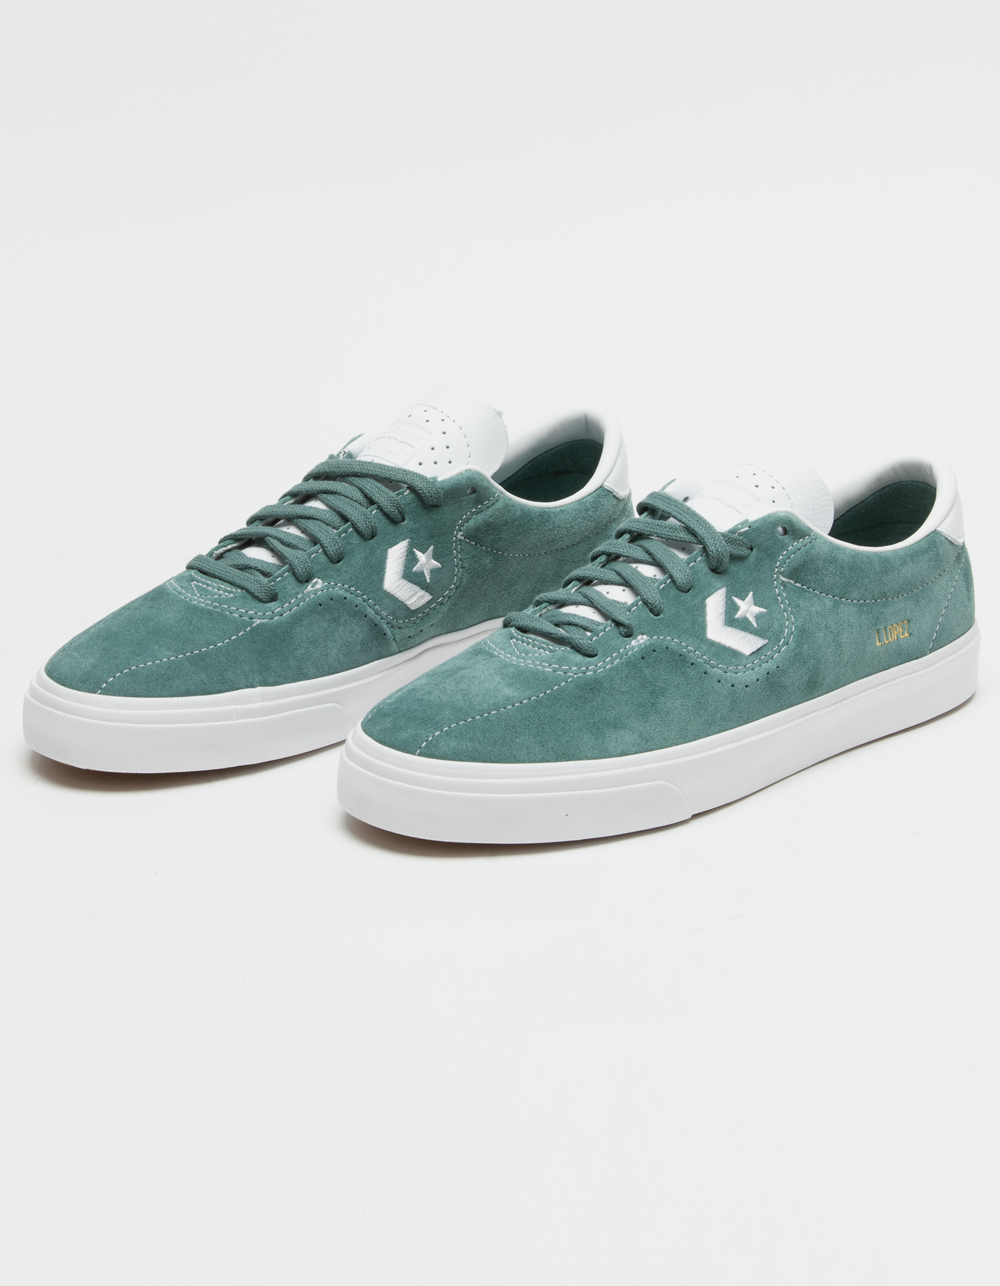 Top 62+ images converse louie lopez pro green - In.thptnganamst.edu.vn